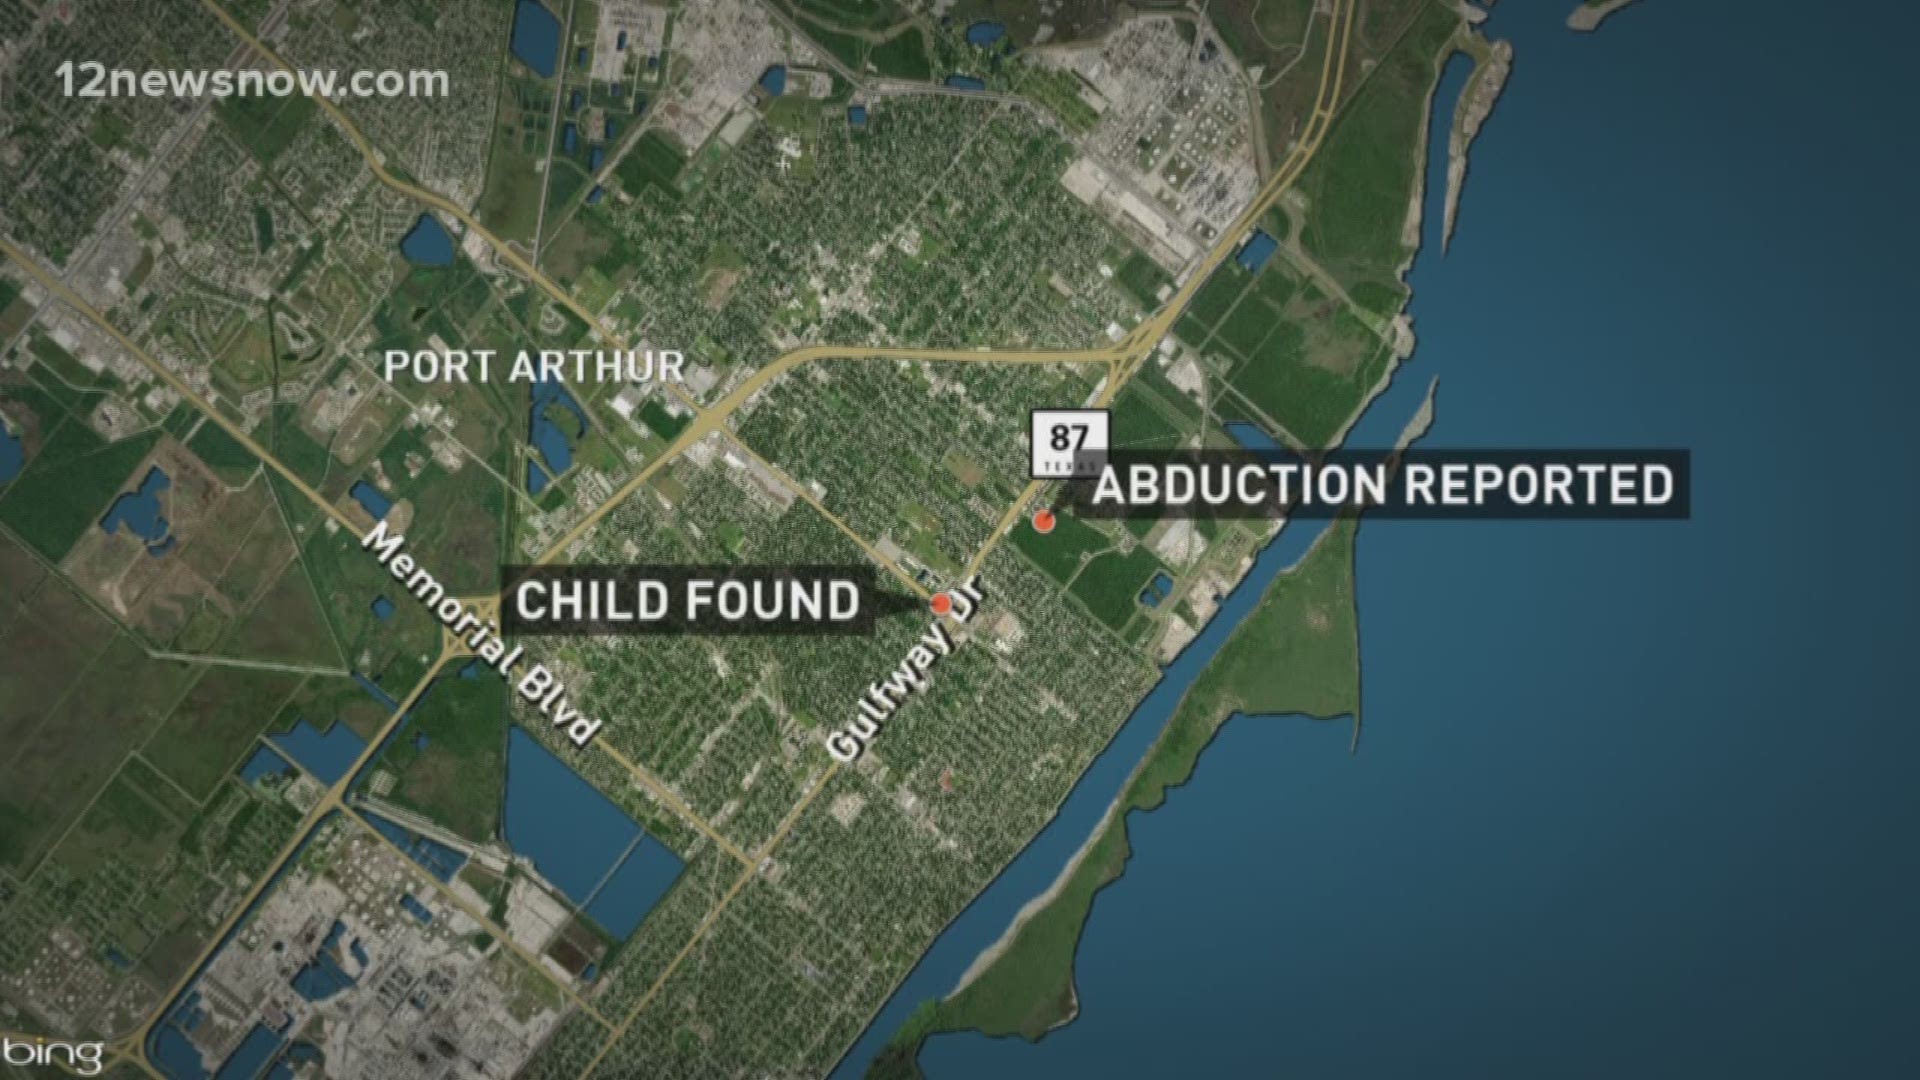 A child was abducted in Port Arthur. She was able to identify potential suspects.